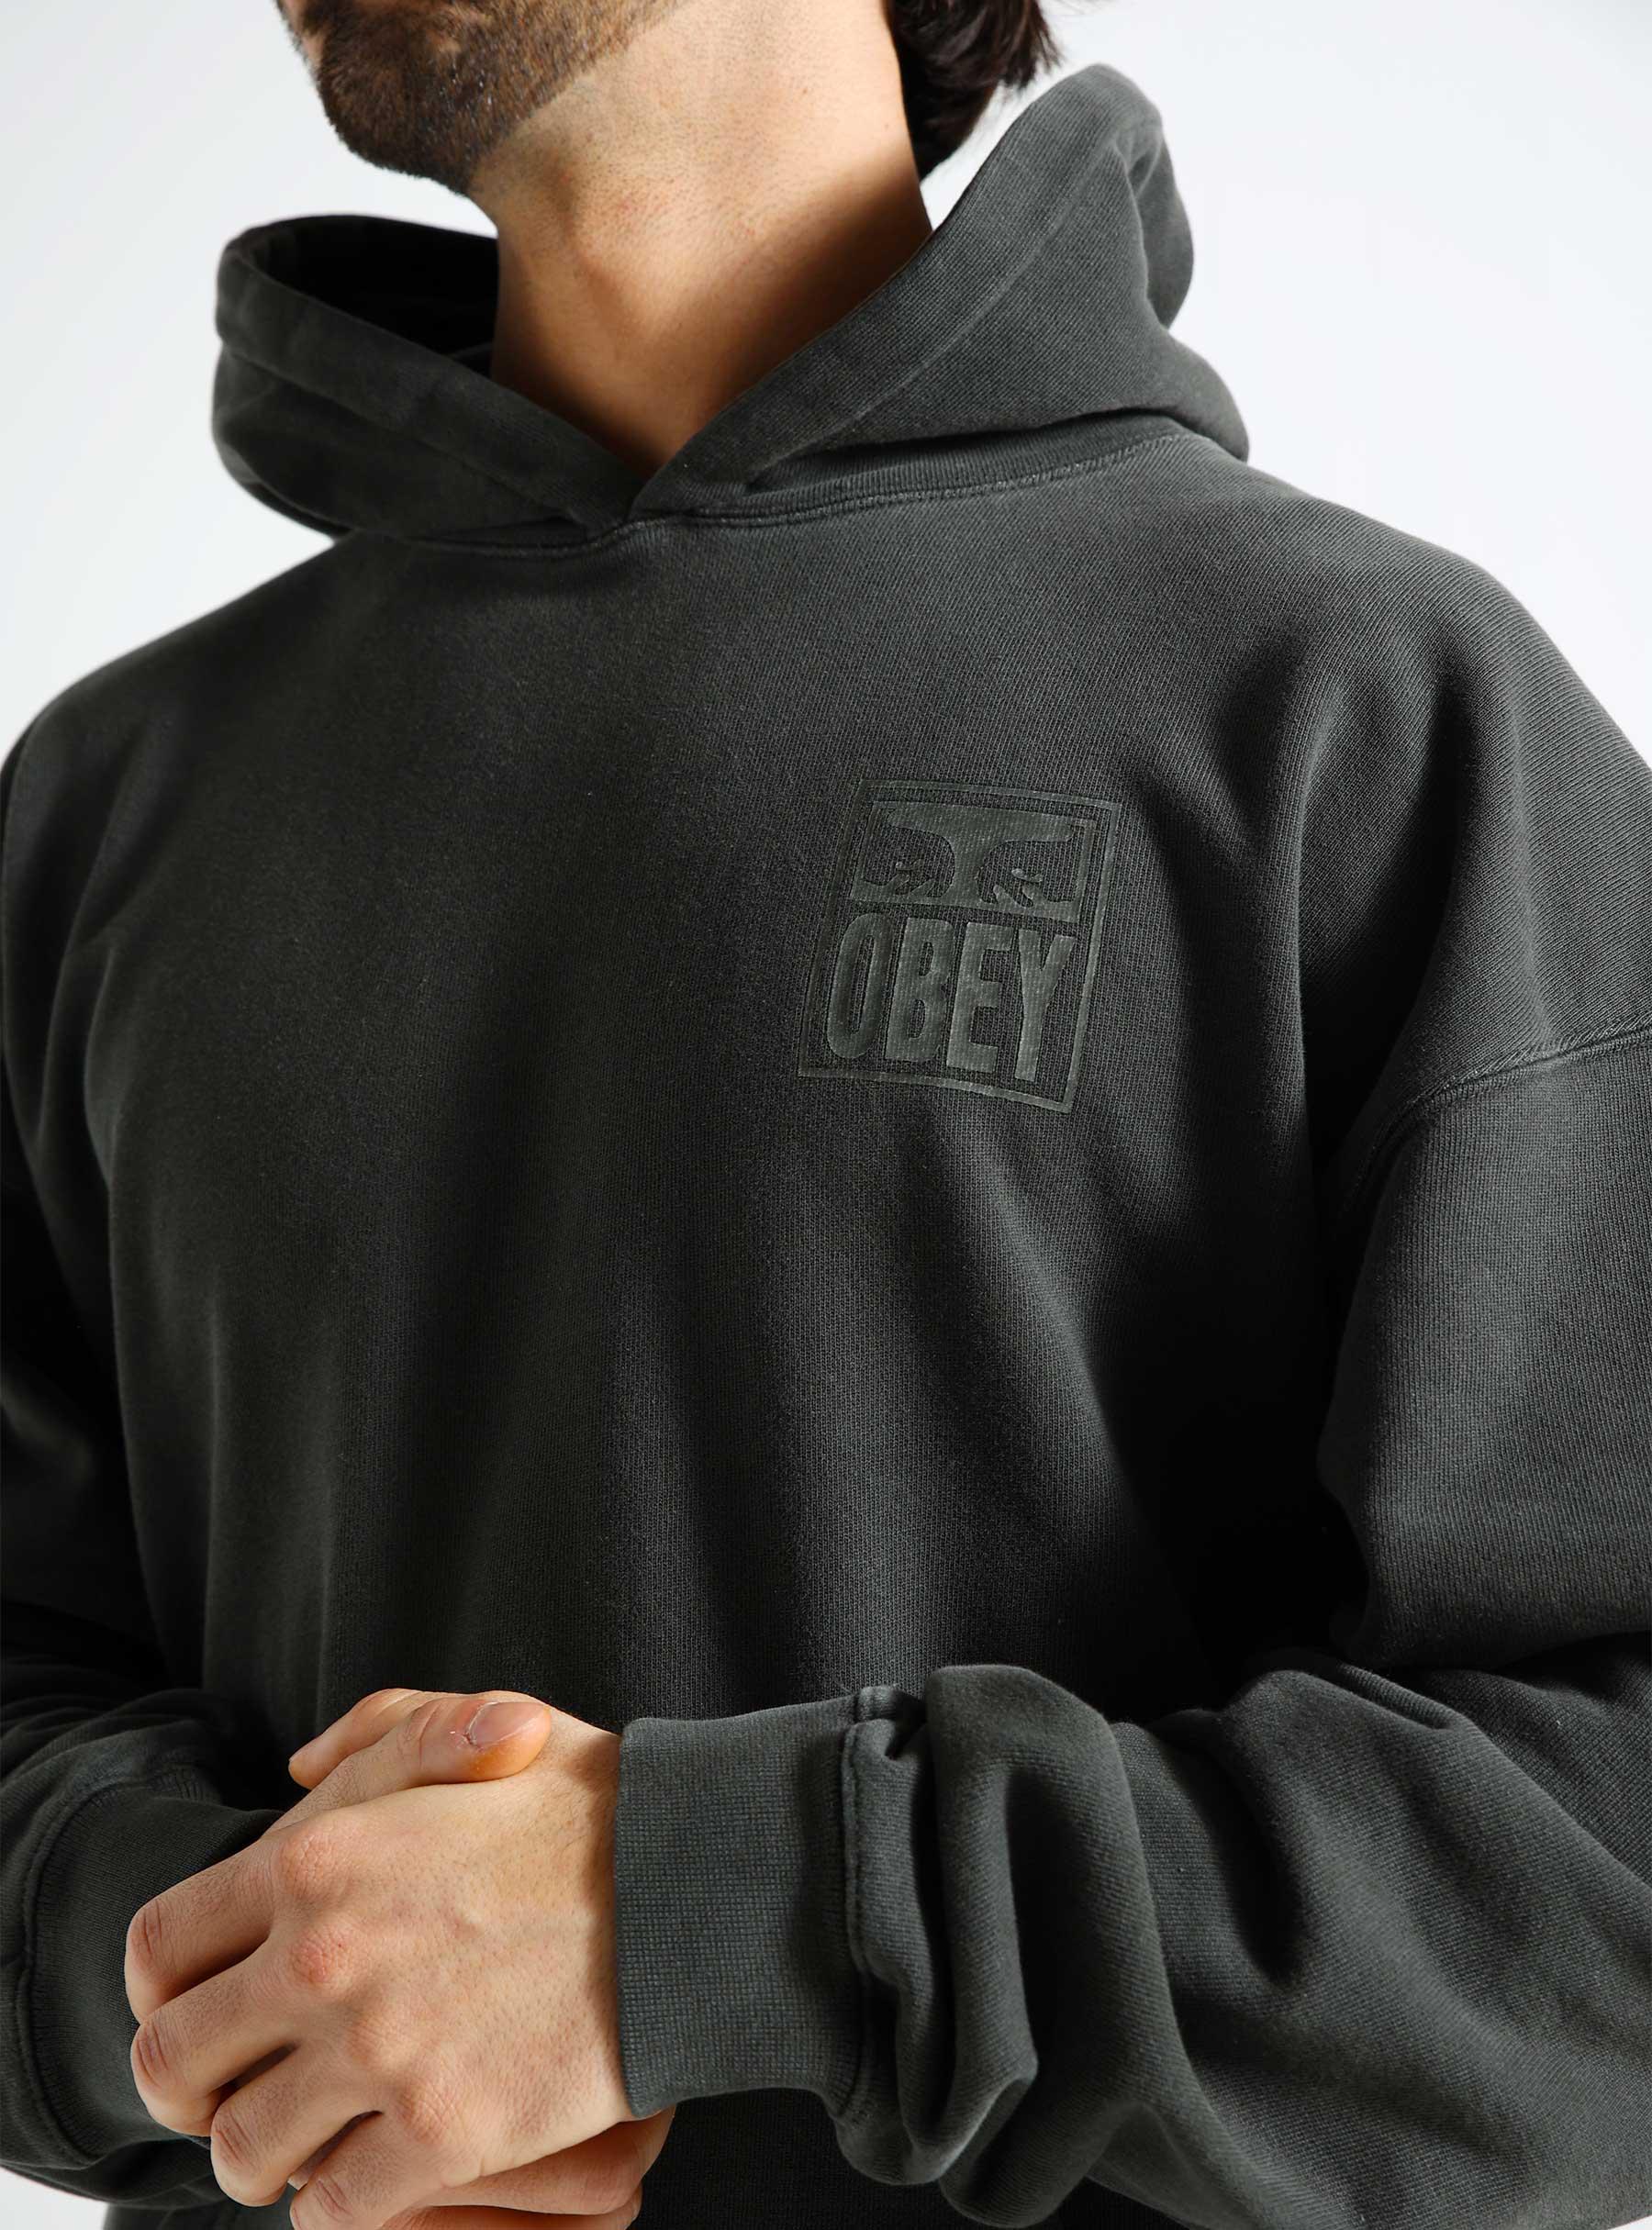 Pigment Obey Eyes Icon Extra Hoodie Pigment Pirate Black 112470212-PBA